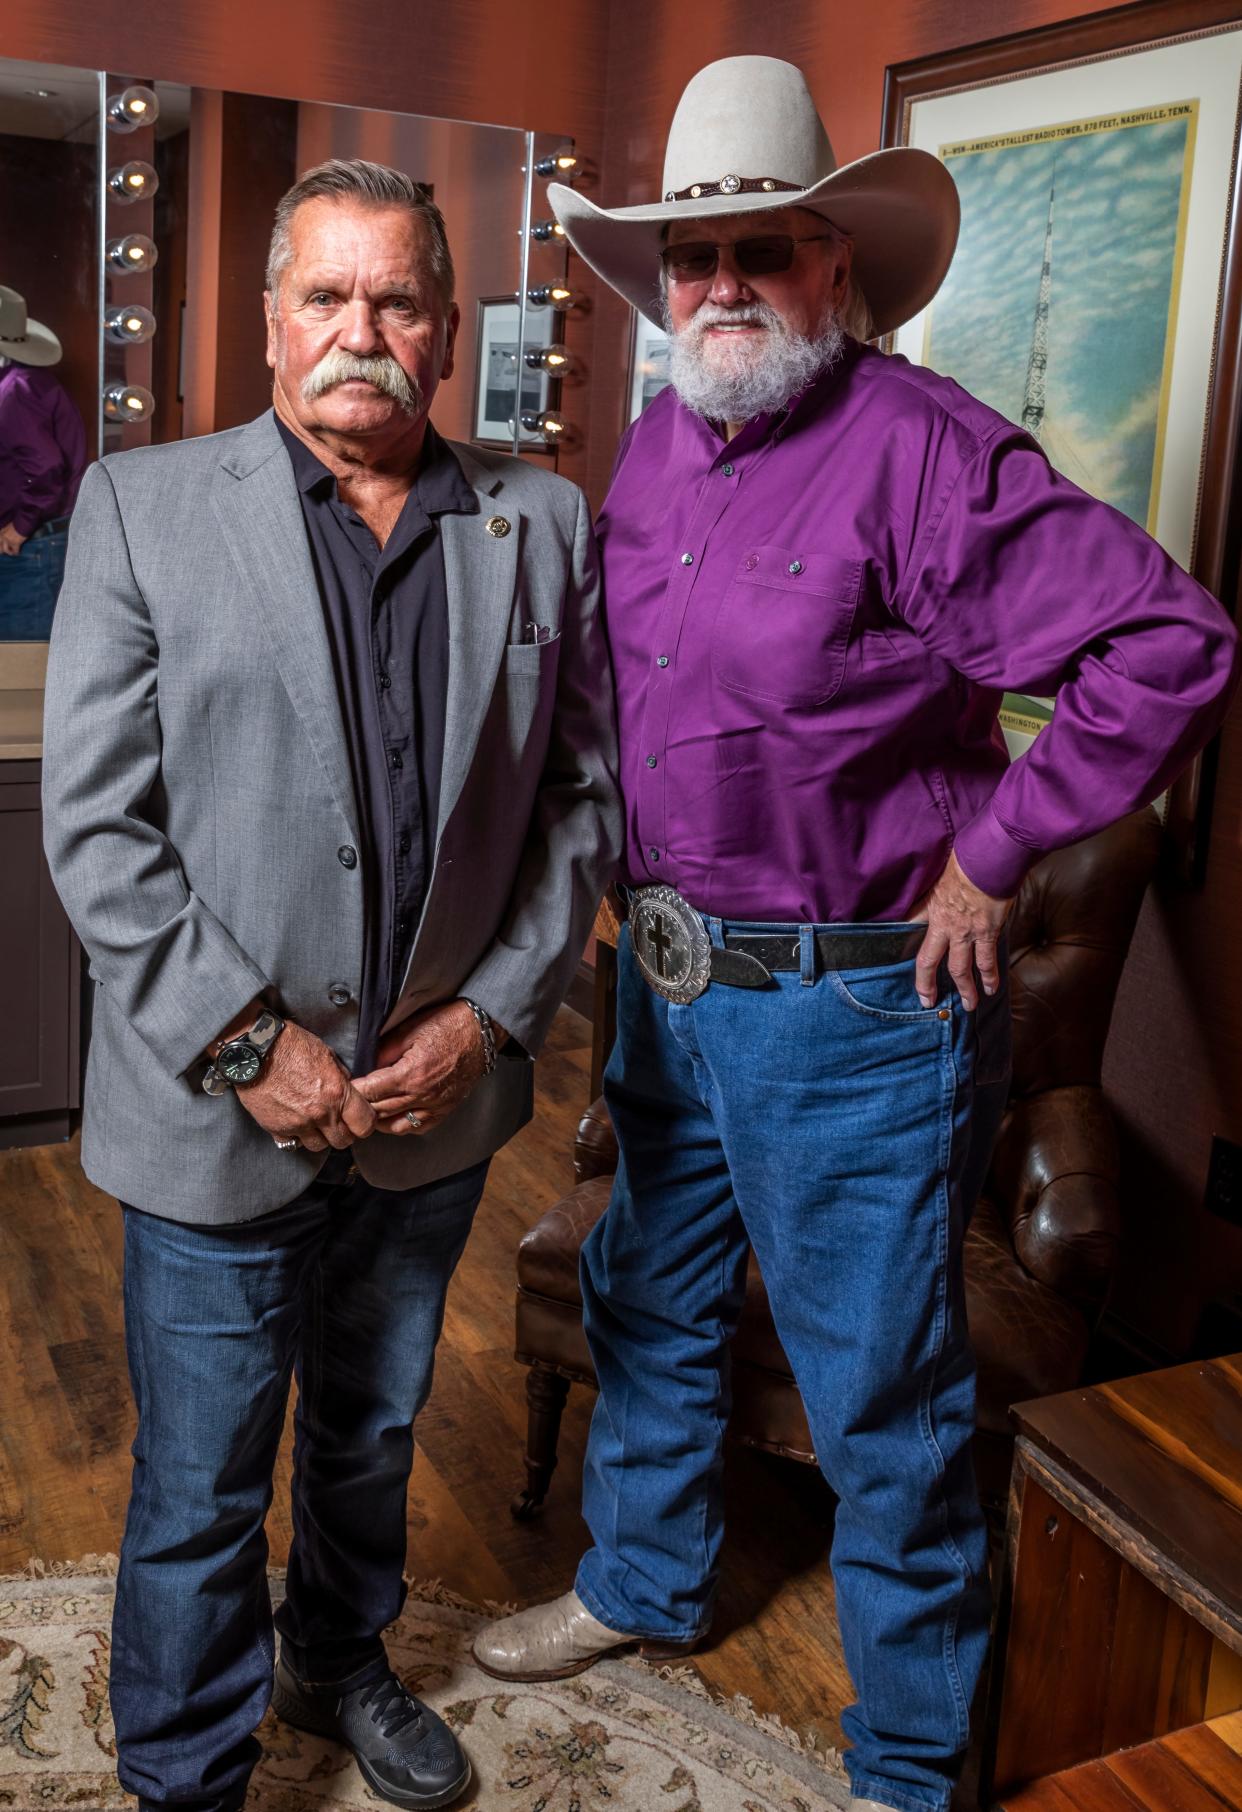 David Corlew and Charlie Daniels are photographed backstage at the Grand Ole Opry House Tuesday, October 15, 2019.